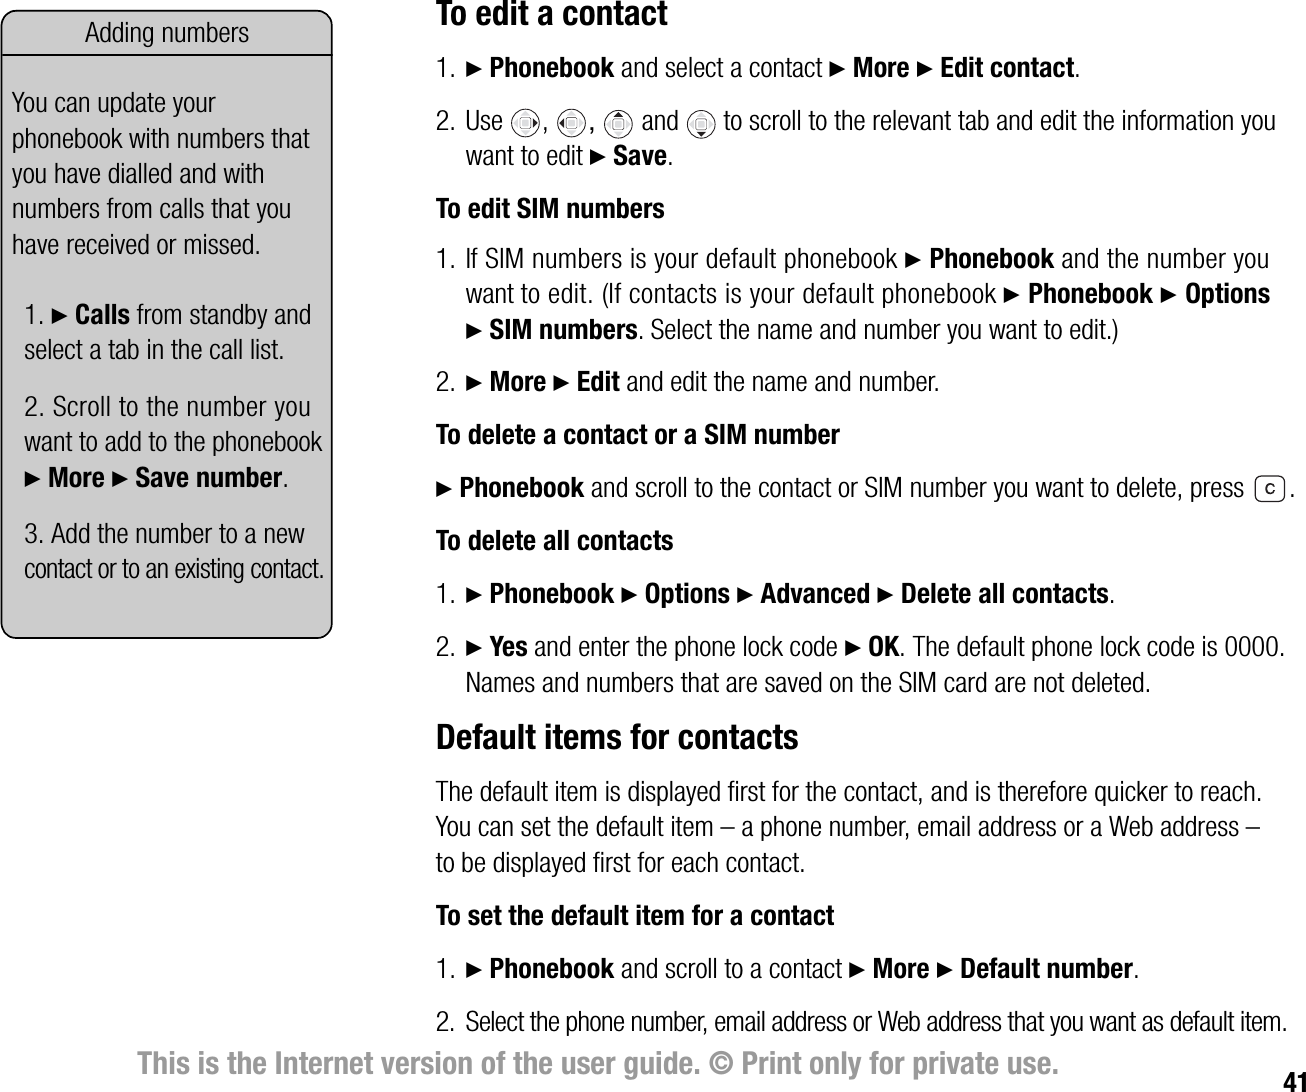 41This is the Internet version of the user guide. © Print only for private use.To edit a contact1. } Phonebook and select a contact } More } Edit contact.2. Use ,  and to scroll to the relevant tab and edit the information you want to edit } Save.To edit SIM numbers1. If SIM numbers is your default phonebook } Phonebook and the number you want to edit. (If contacts is your default phonebook } Phonebook } Options } SIM numbers. Select the name and number you want to edit.)2. } More } Edit and edit the name and number.To delete a contact or a SIM number} Phonebook and scroll to the contact or SIM number you want to delete, press  .To delete all contacts1. } Phonebook } Options } Advanced } Delete all contacts.2. } Yes and enter the phone lock code } OK. The default phone lock code is 0000. Names and numbers that are saved on the SIM card are not deleted.Default items for contactsThe default item is displayed first for the contact, and is therefore quicker to reach. You can set the default item – a phone number, email address or a Web address – to be displayed first for each contact.To set the default item for a contact1. } Phonebook and scroll to a contact } More } Default number.2. Select the phone number, email address or Web address that you want as default item.Adding numbersYou can update your phonebook with numbers that you have dialled and with numbers from calls that you have received or missed.1. } Calls from standby and select a tab in the call list.2. Scroll to the number you want to add to the phonebook } More } Save number.3. Add the number to a new contact or to an existing contact.